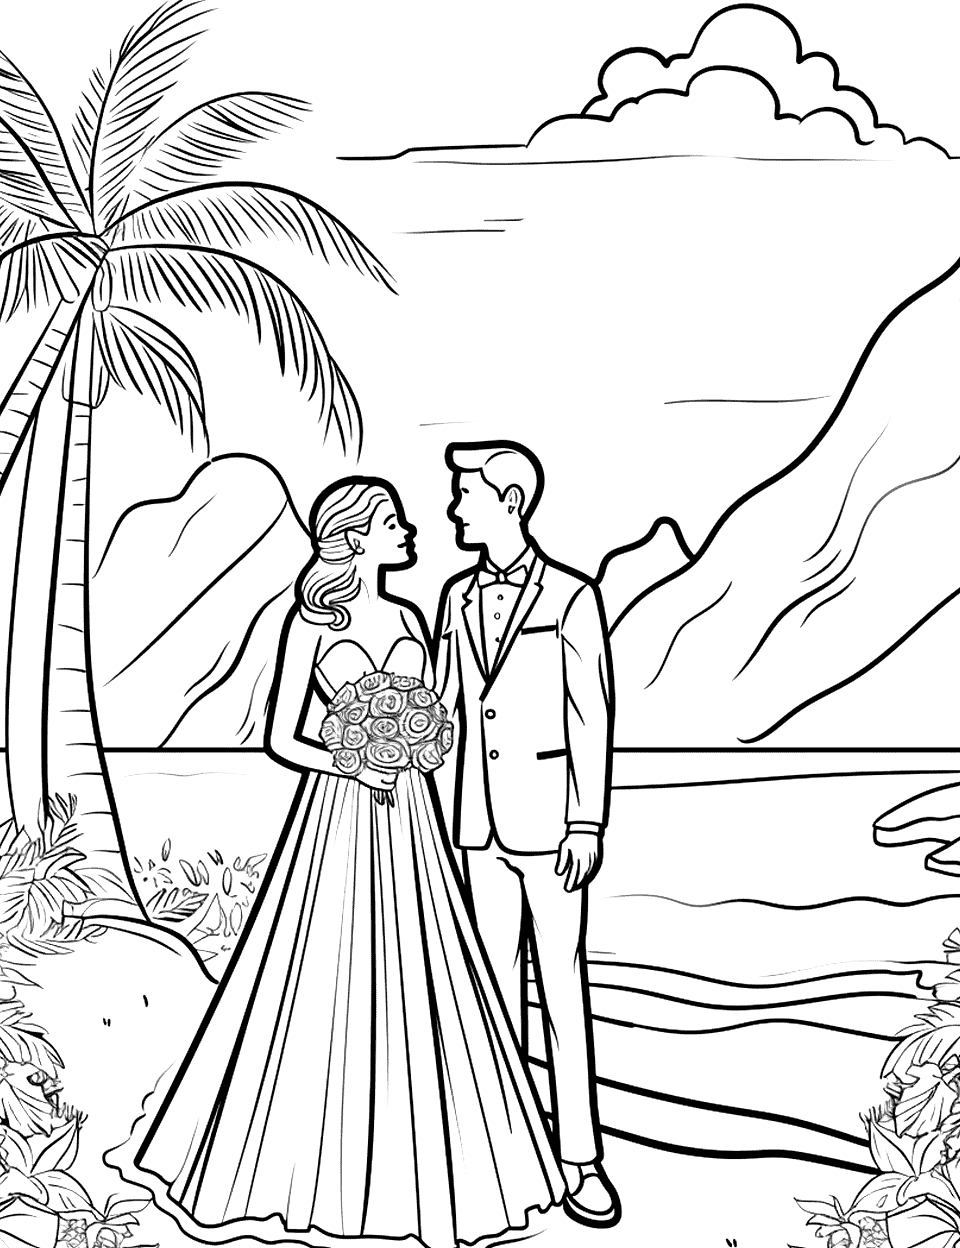 Destination Wedding Adventure Coloring Page - A couple celebrating their wedding at an exotic location with mountains in the background.